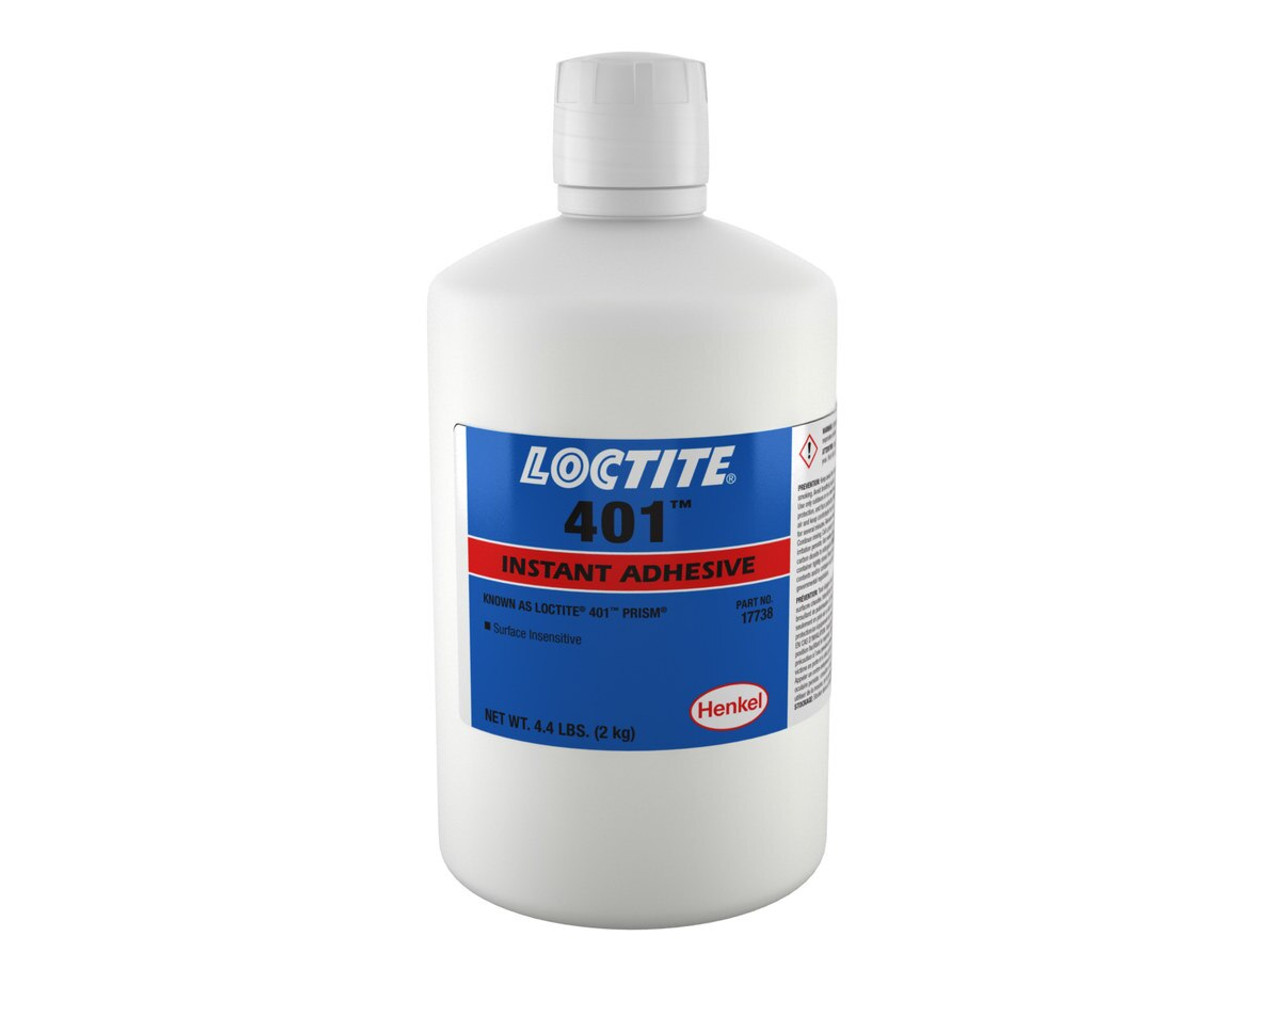 LOCTITE 401 Instant Adhesive General Purpose - NZ Safety Blackwoods